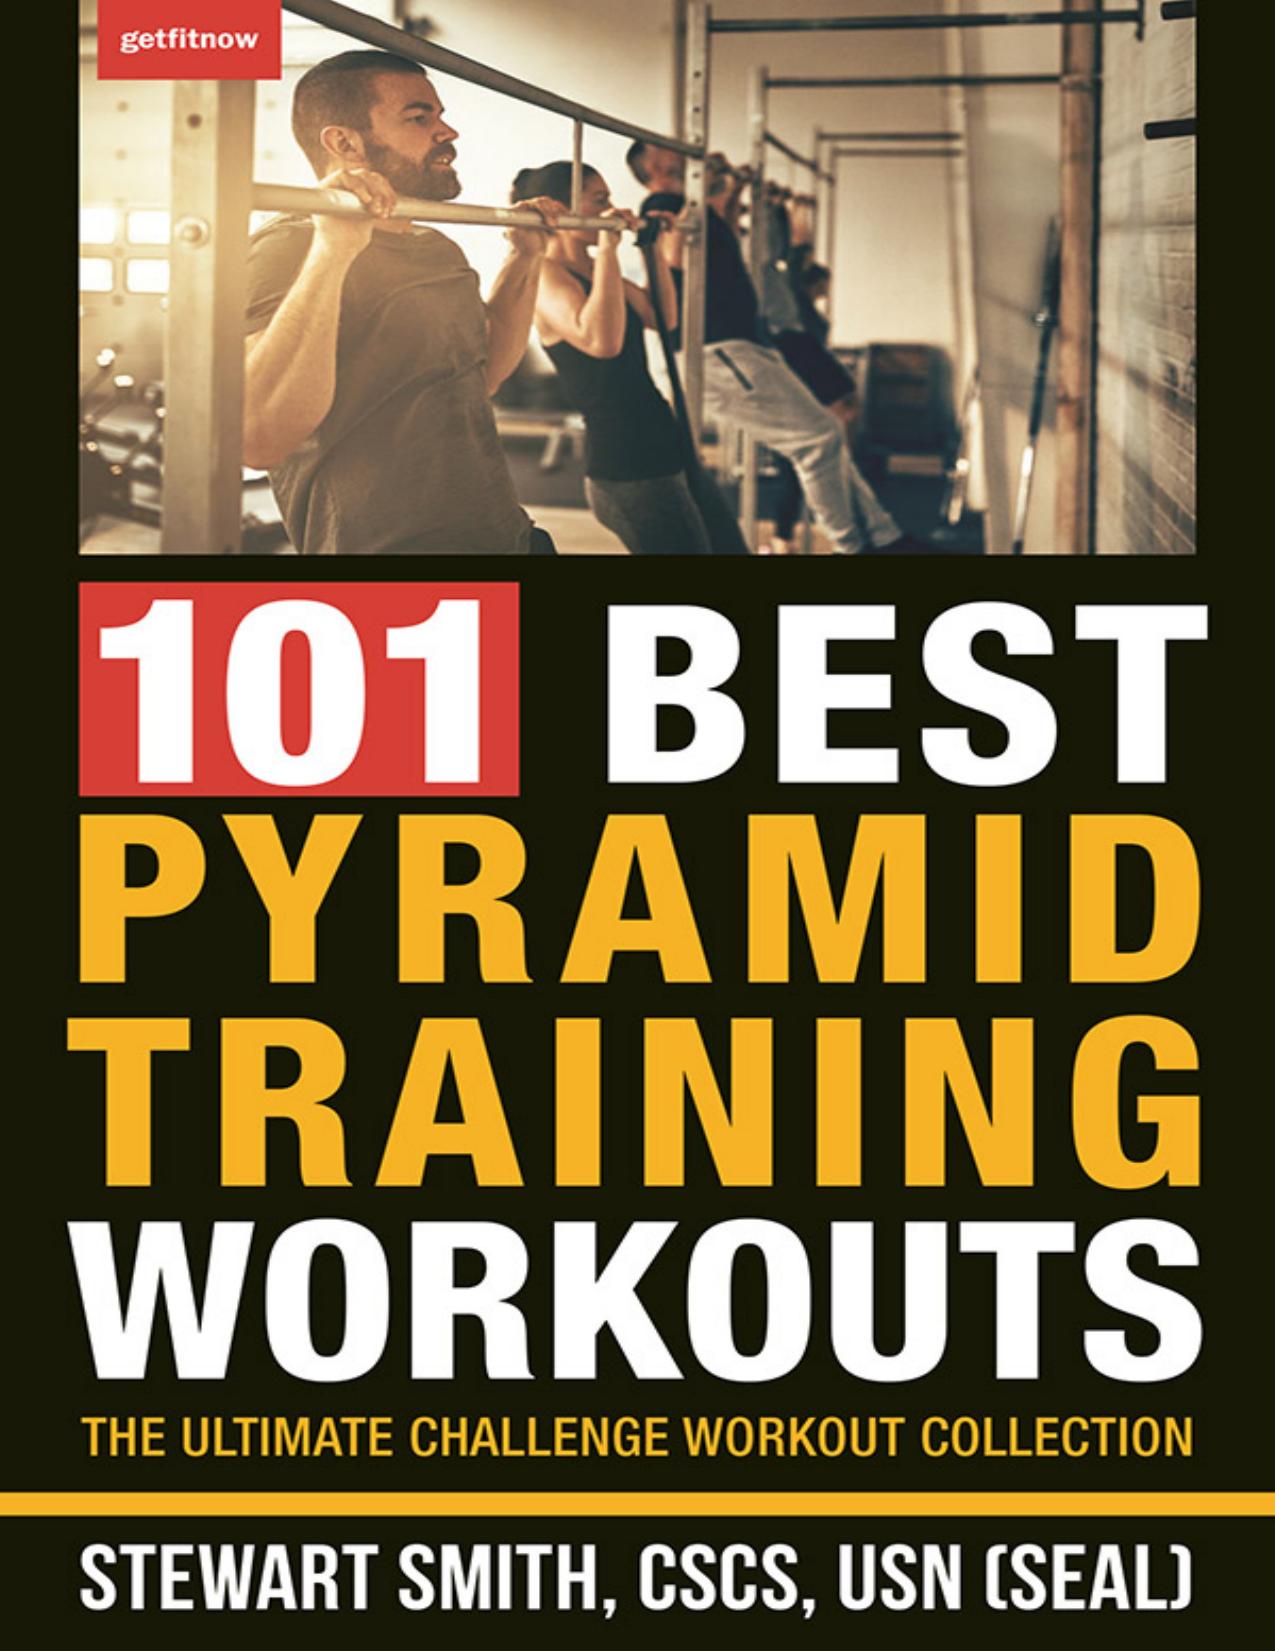 101 Best Pyramid Training Workouts by Stewart Smith